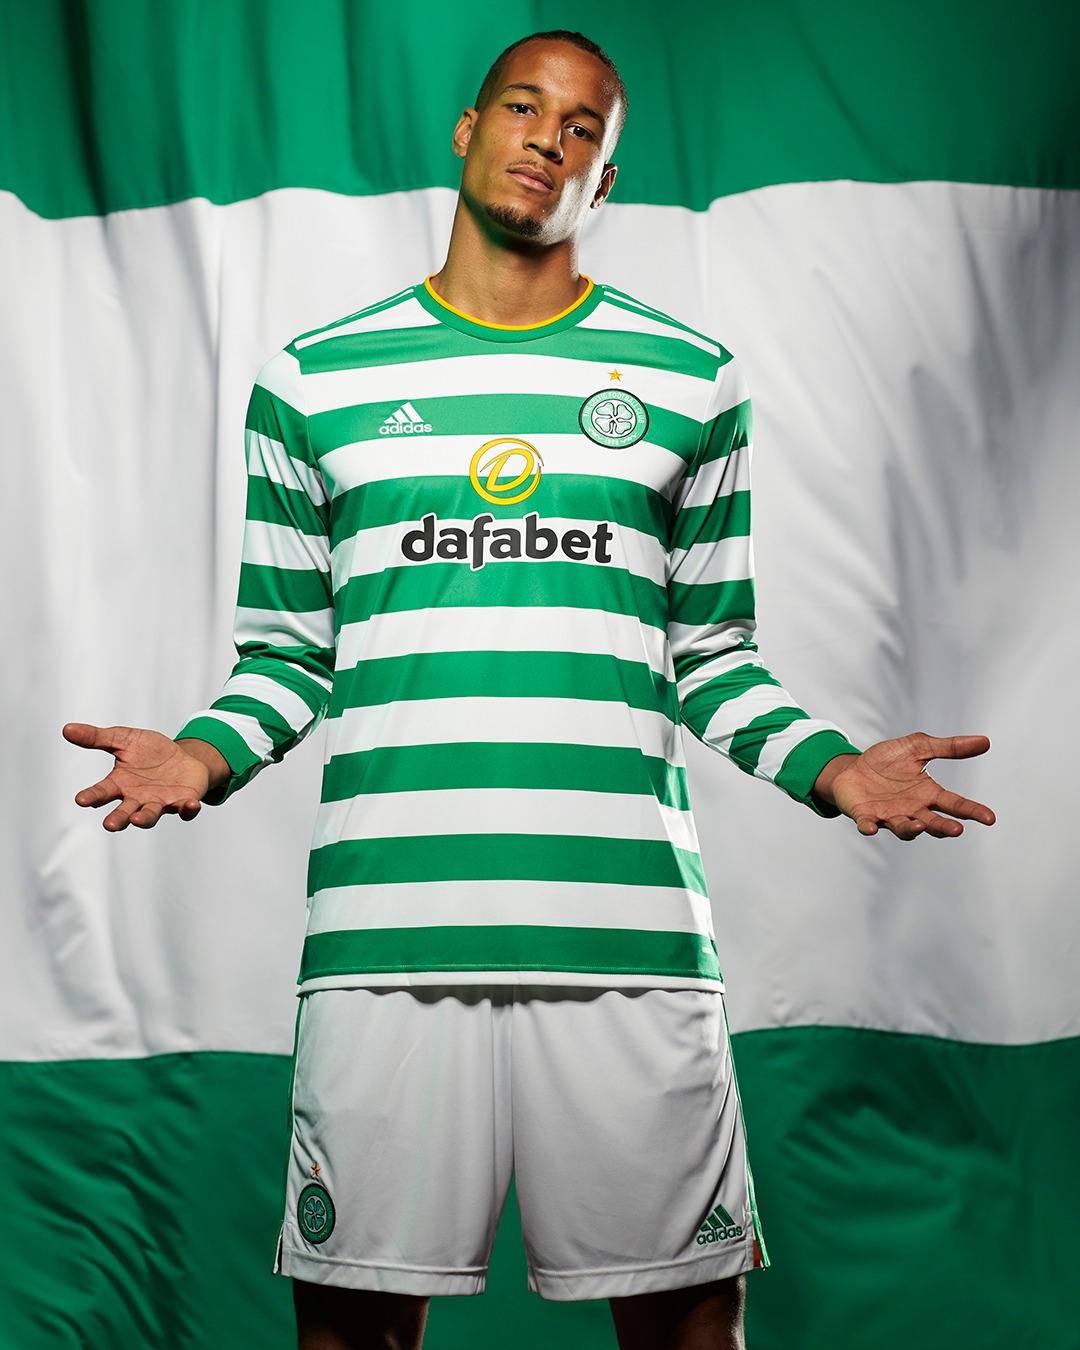 Celtic Football Club on X: 🟢⚪️ The Hoops never looked so good